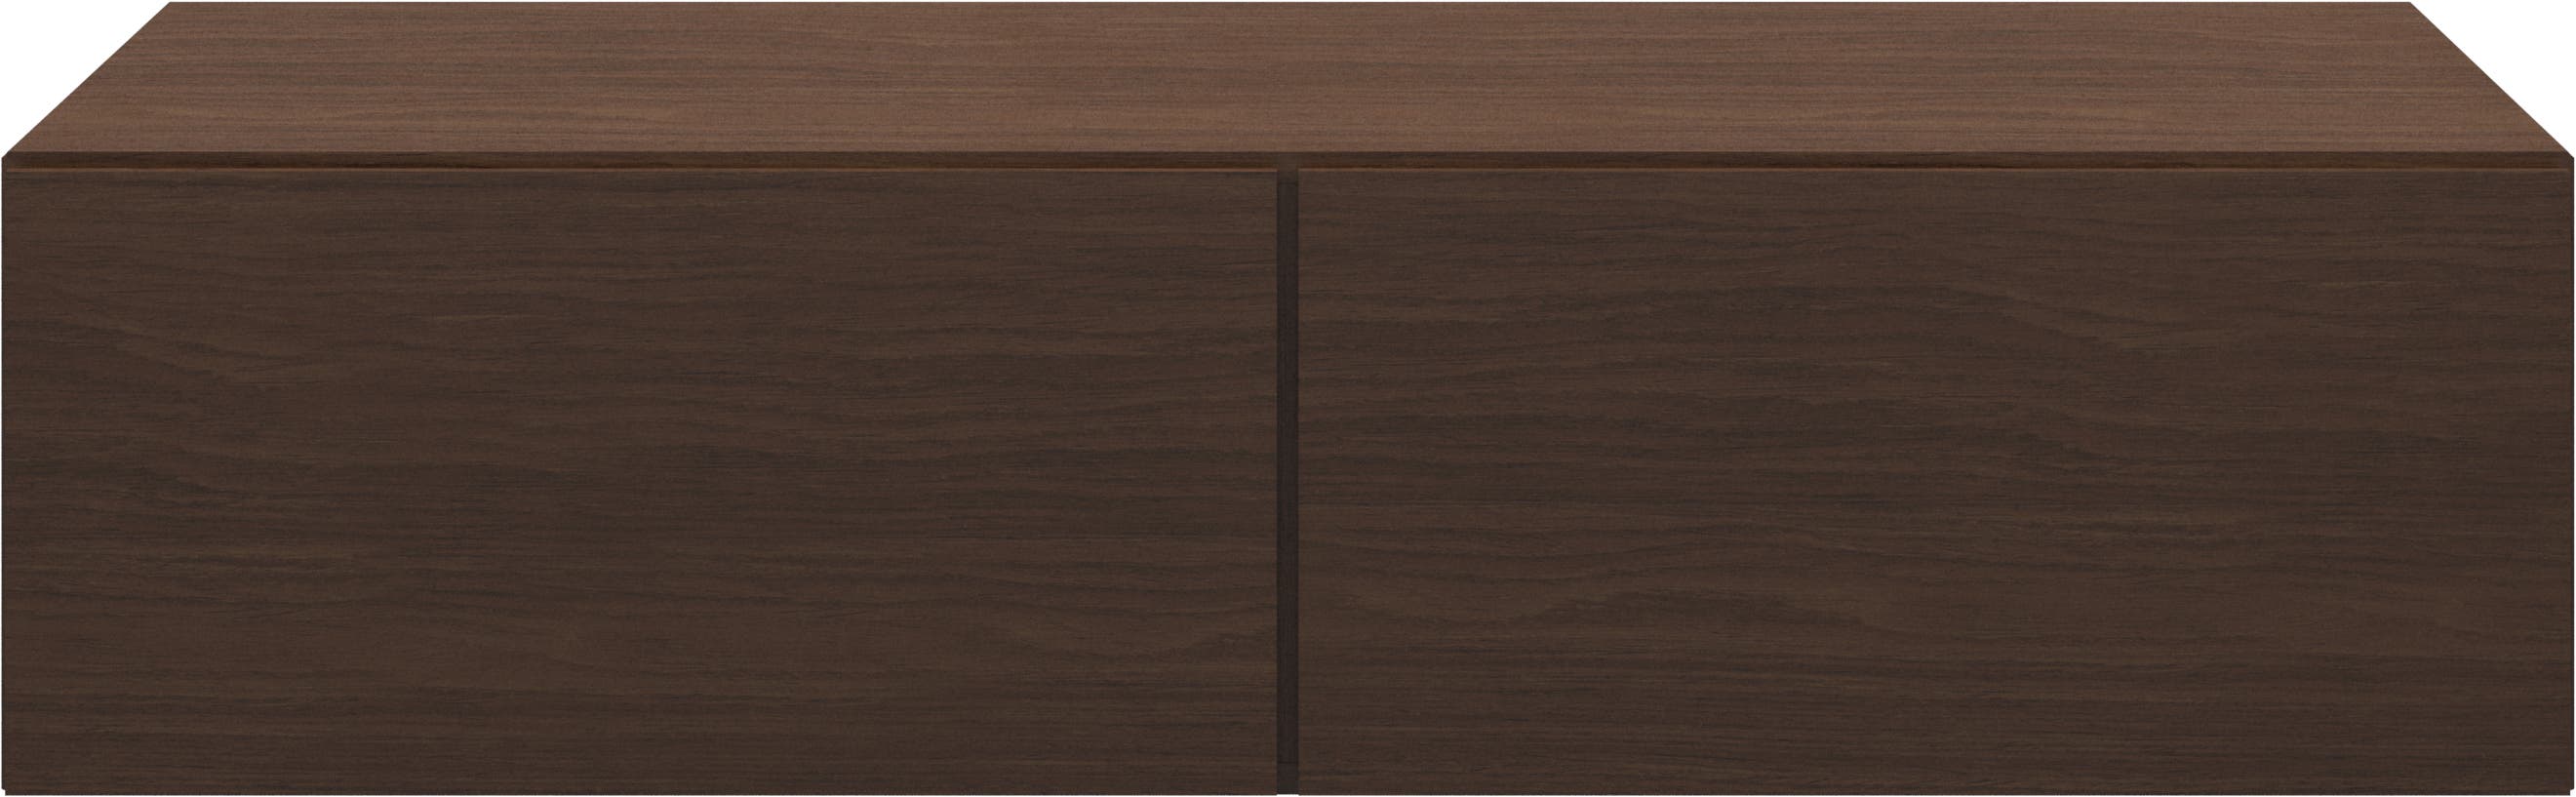 Lugano wall mounted cabinet with drop down doors